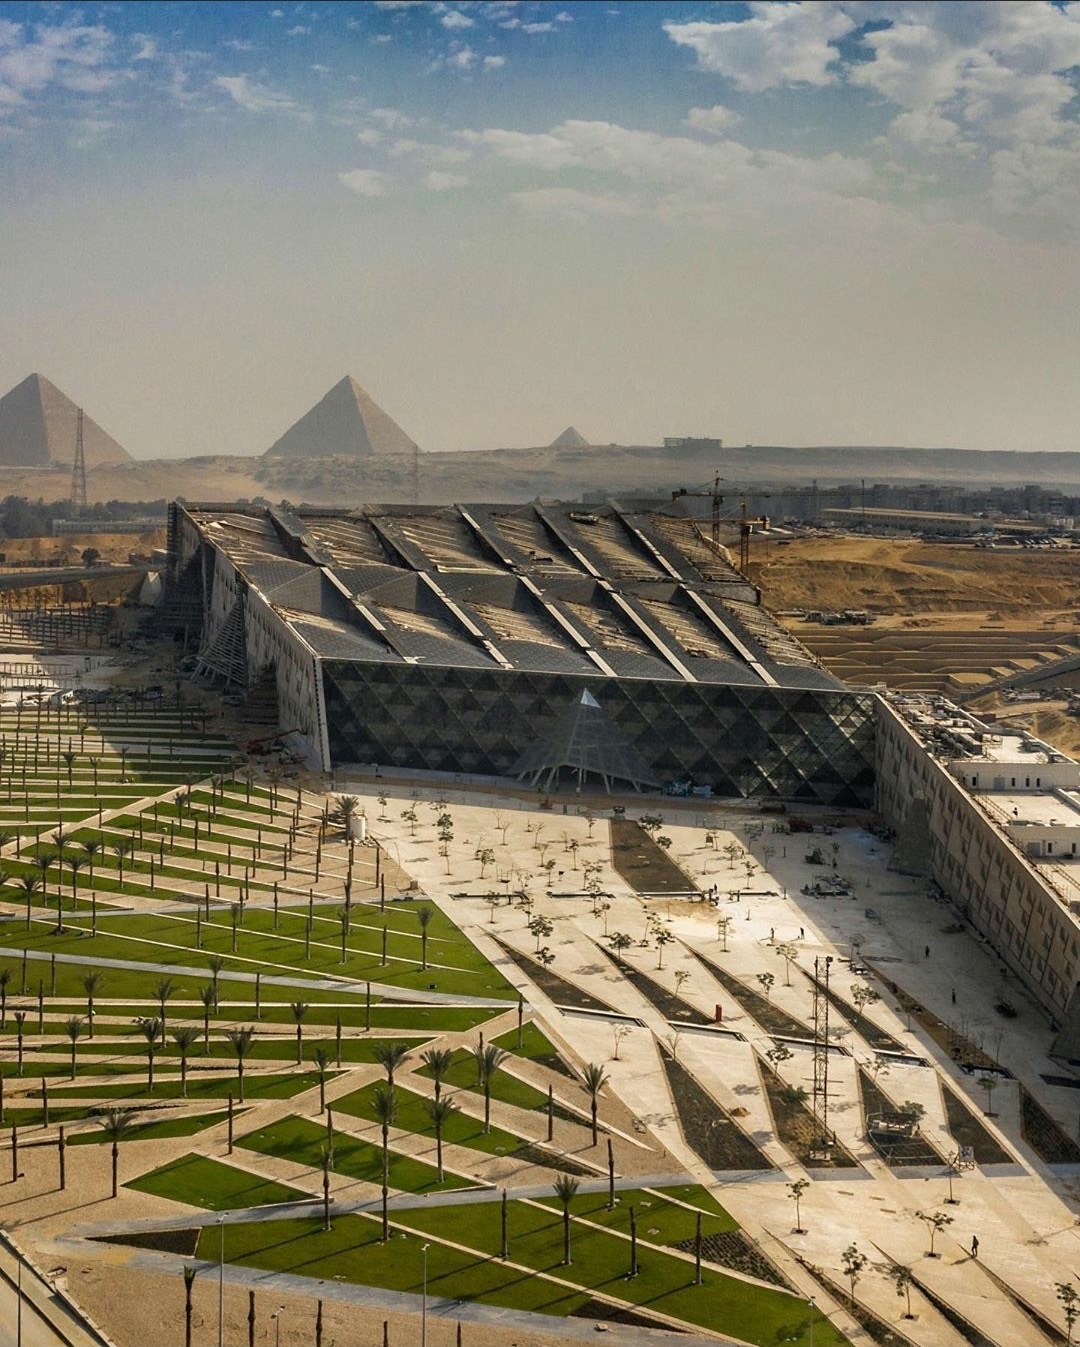 The Grand Egyptian Museum, Giza - 2012-TBD  